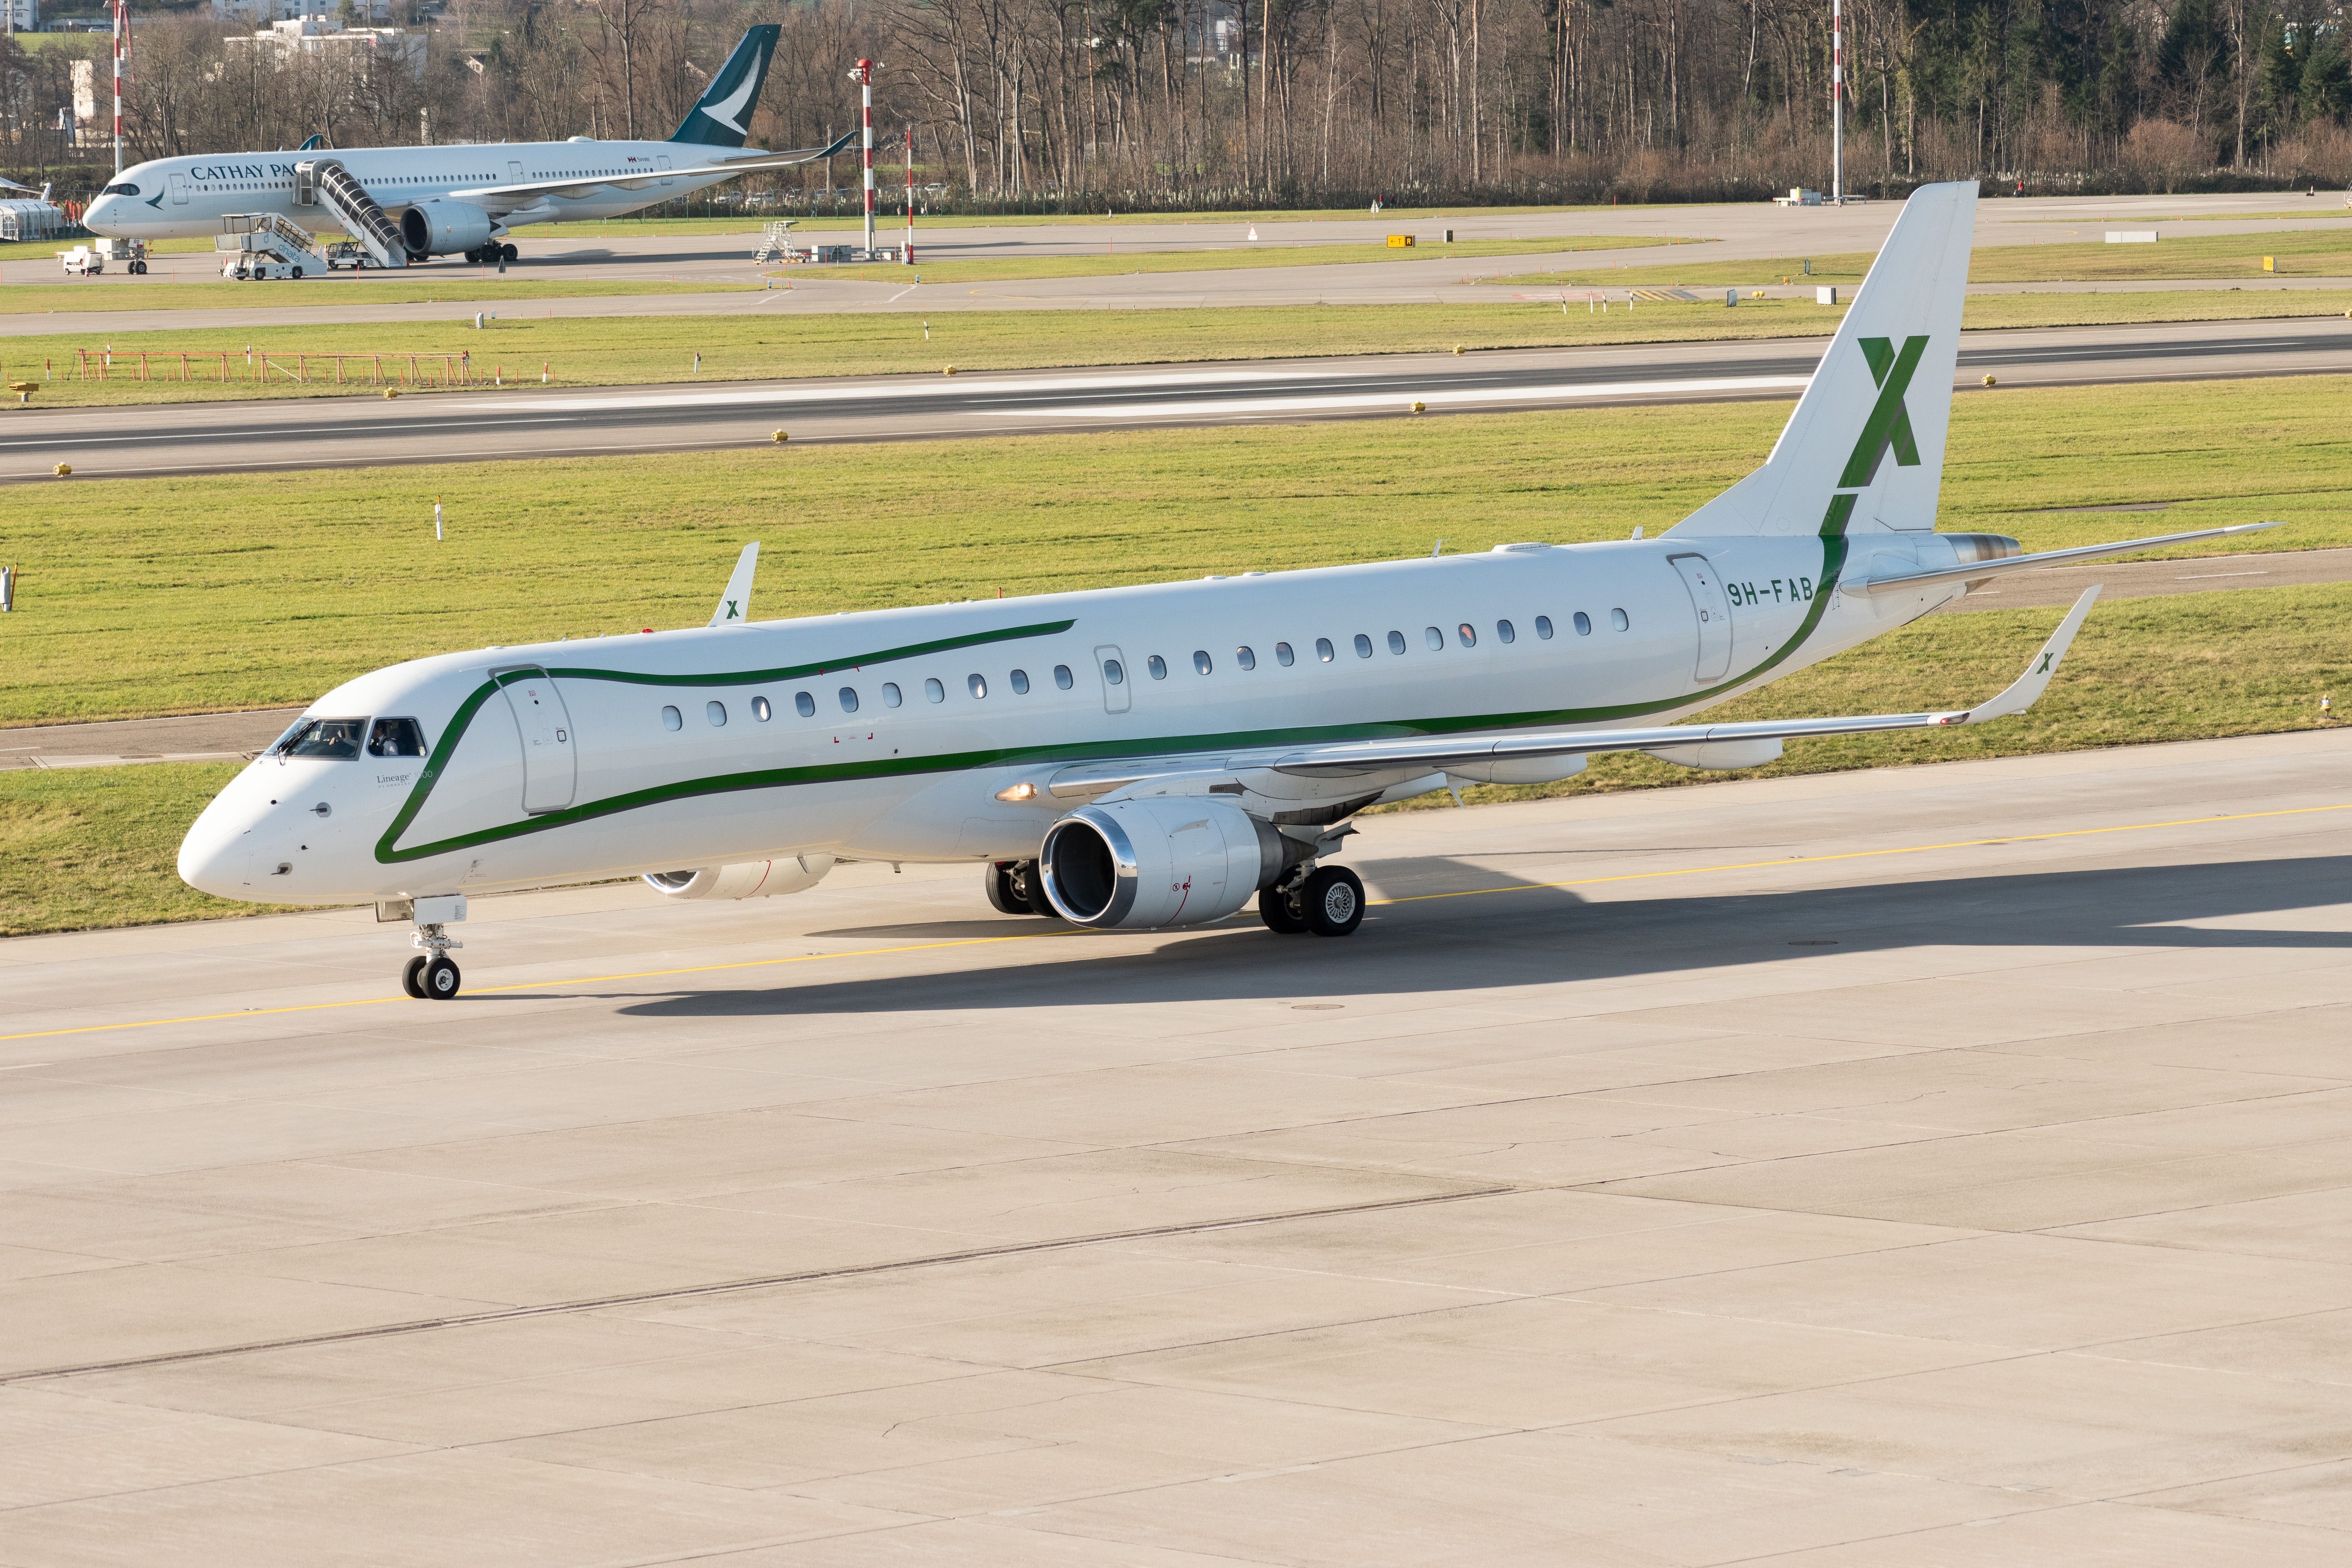 Embraer Lineage 1000 business aircraft is taxiing to the gate